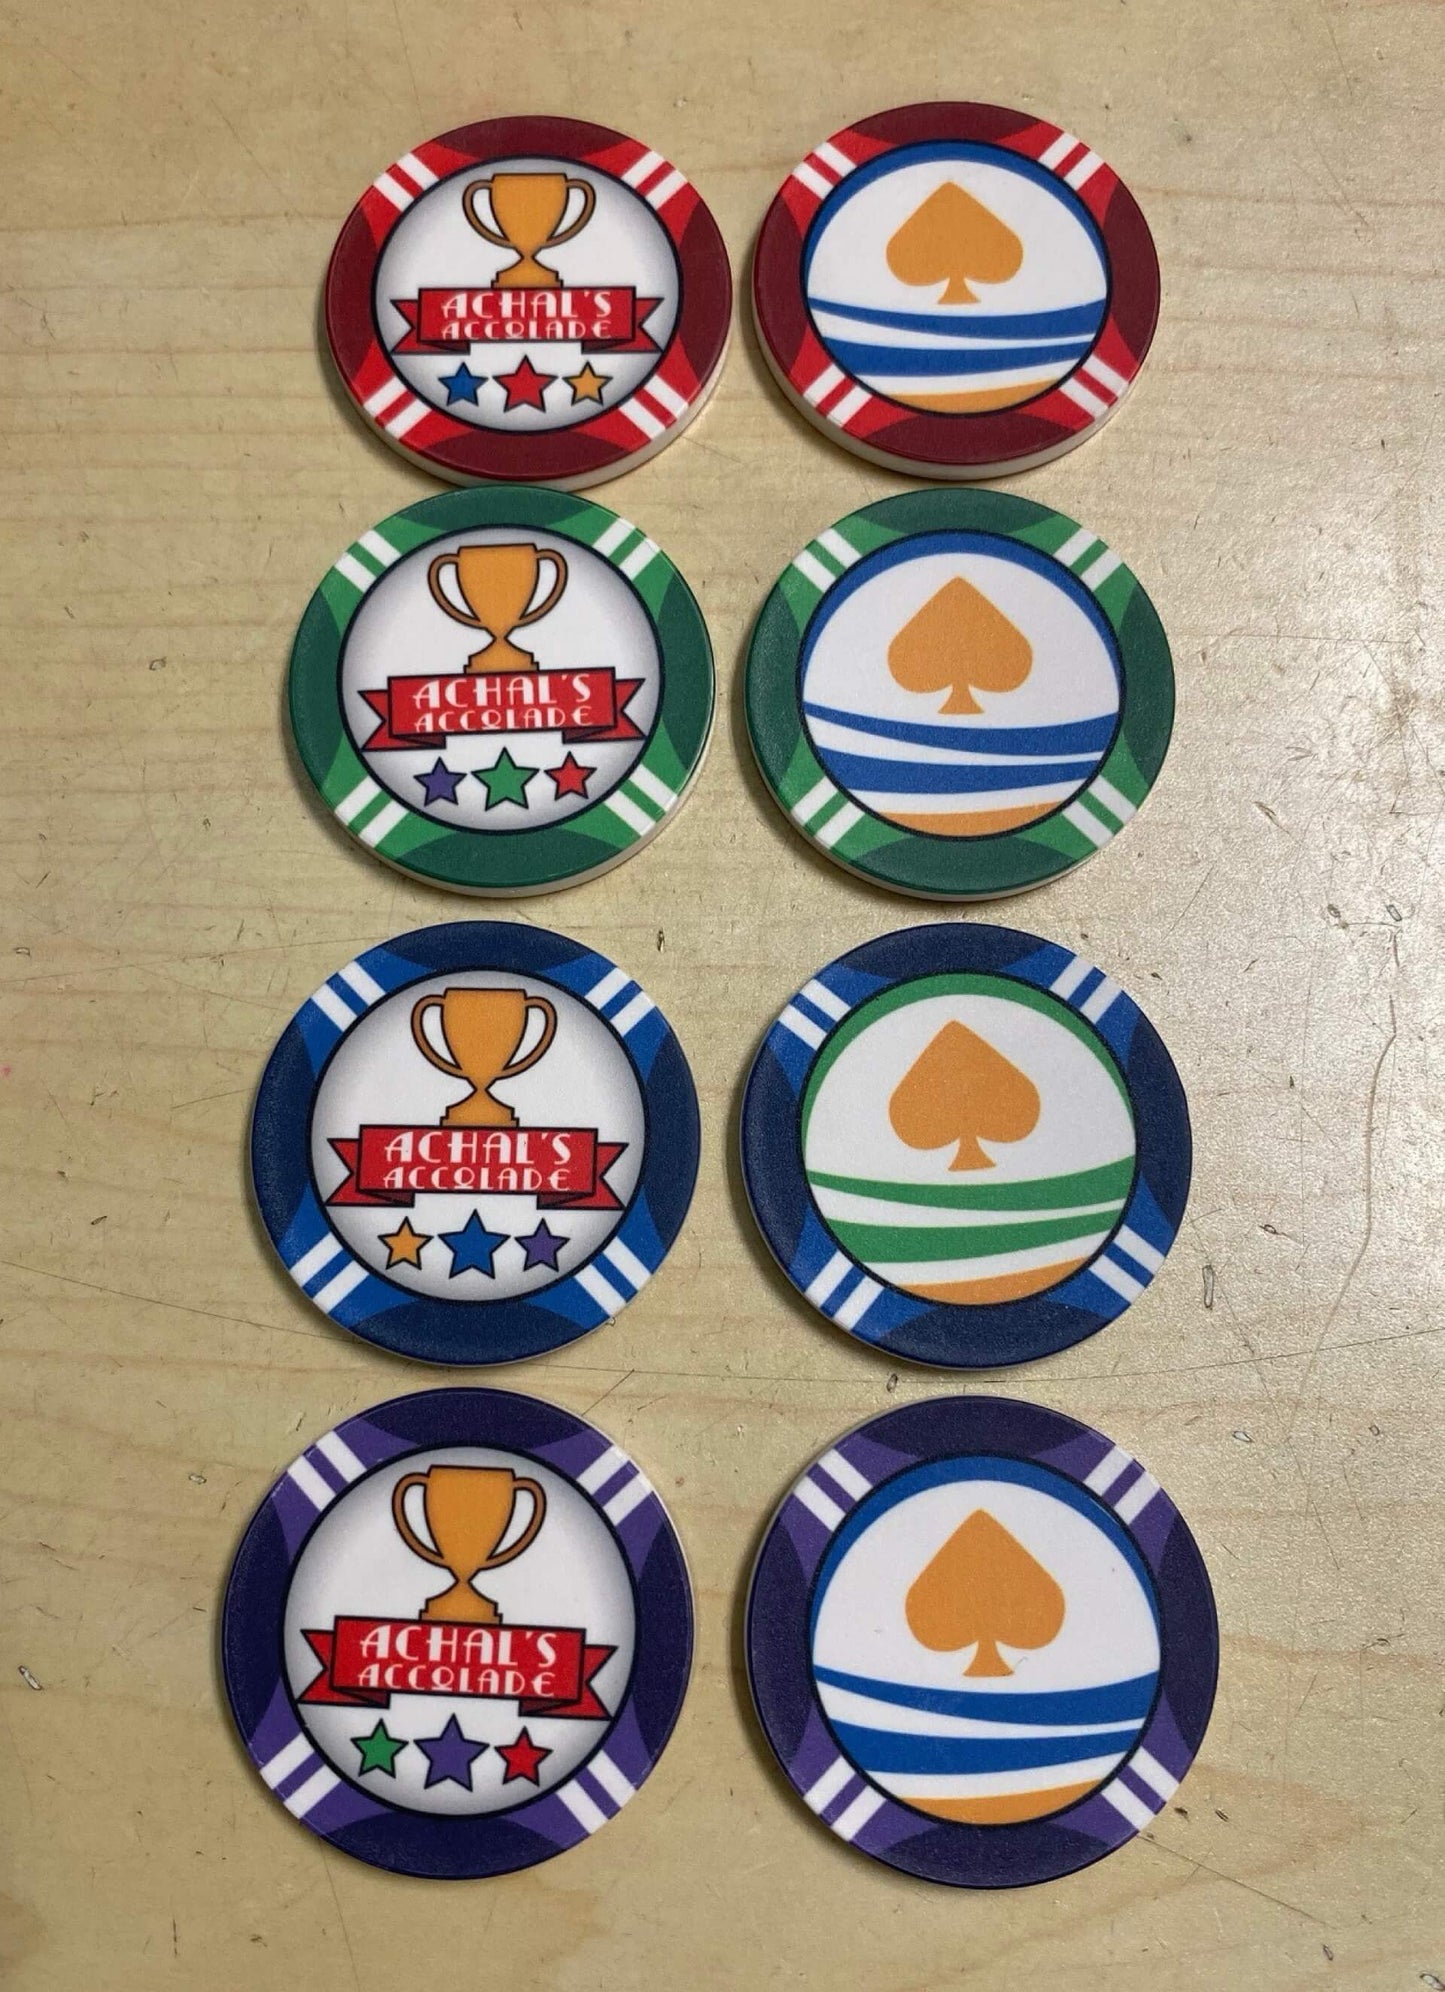 Aurora Poker Gear Custom Reward Token Chip Set for Client - Achal's Accolade - Set of ceramic reward tokens made by Aurora Poker Gear, feature company logo and text, come in various colors, given for merit and achievements.